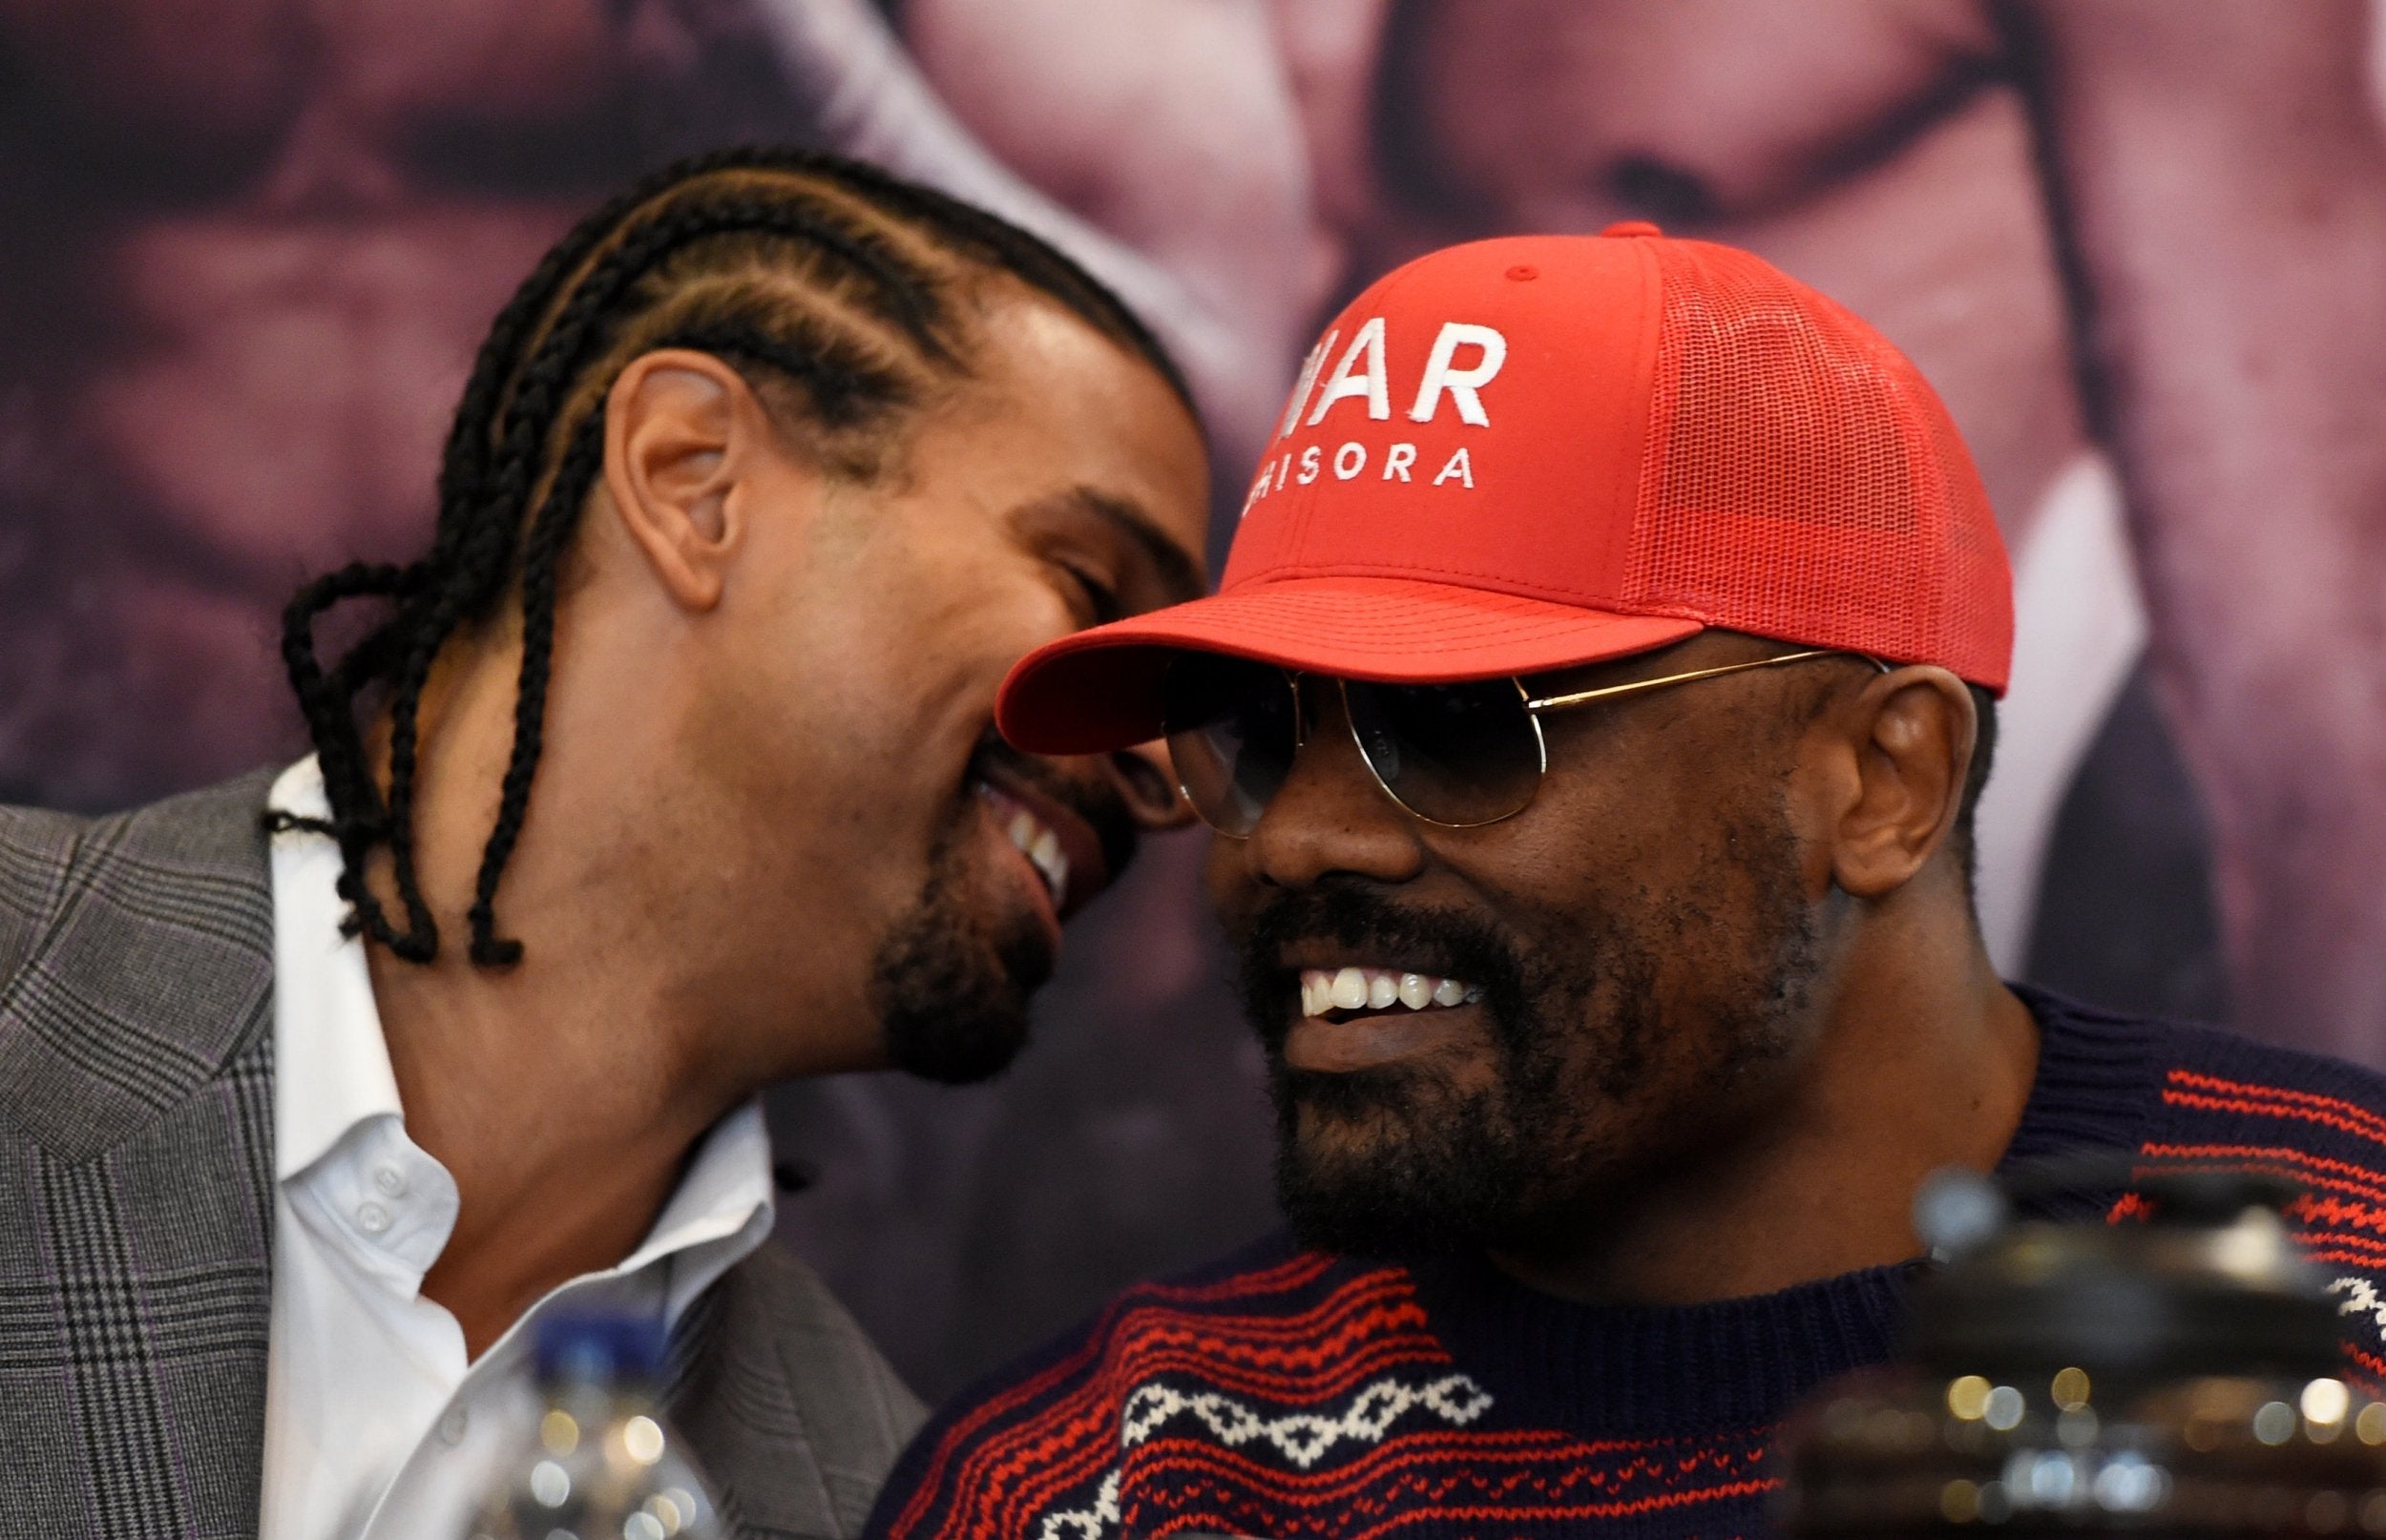 David Haye claims Chisora has transformed since working with him